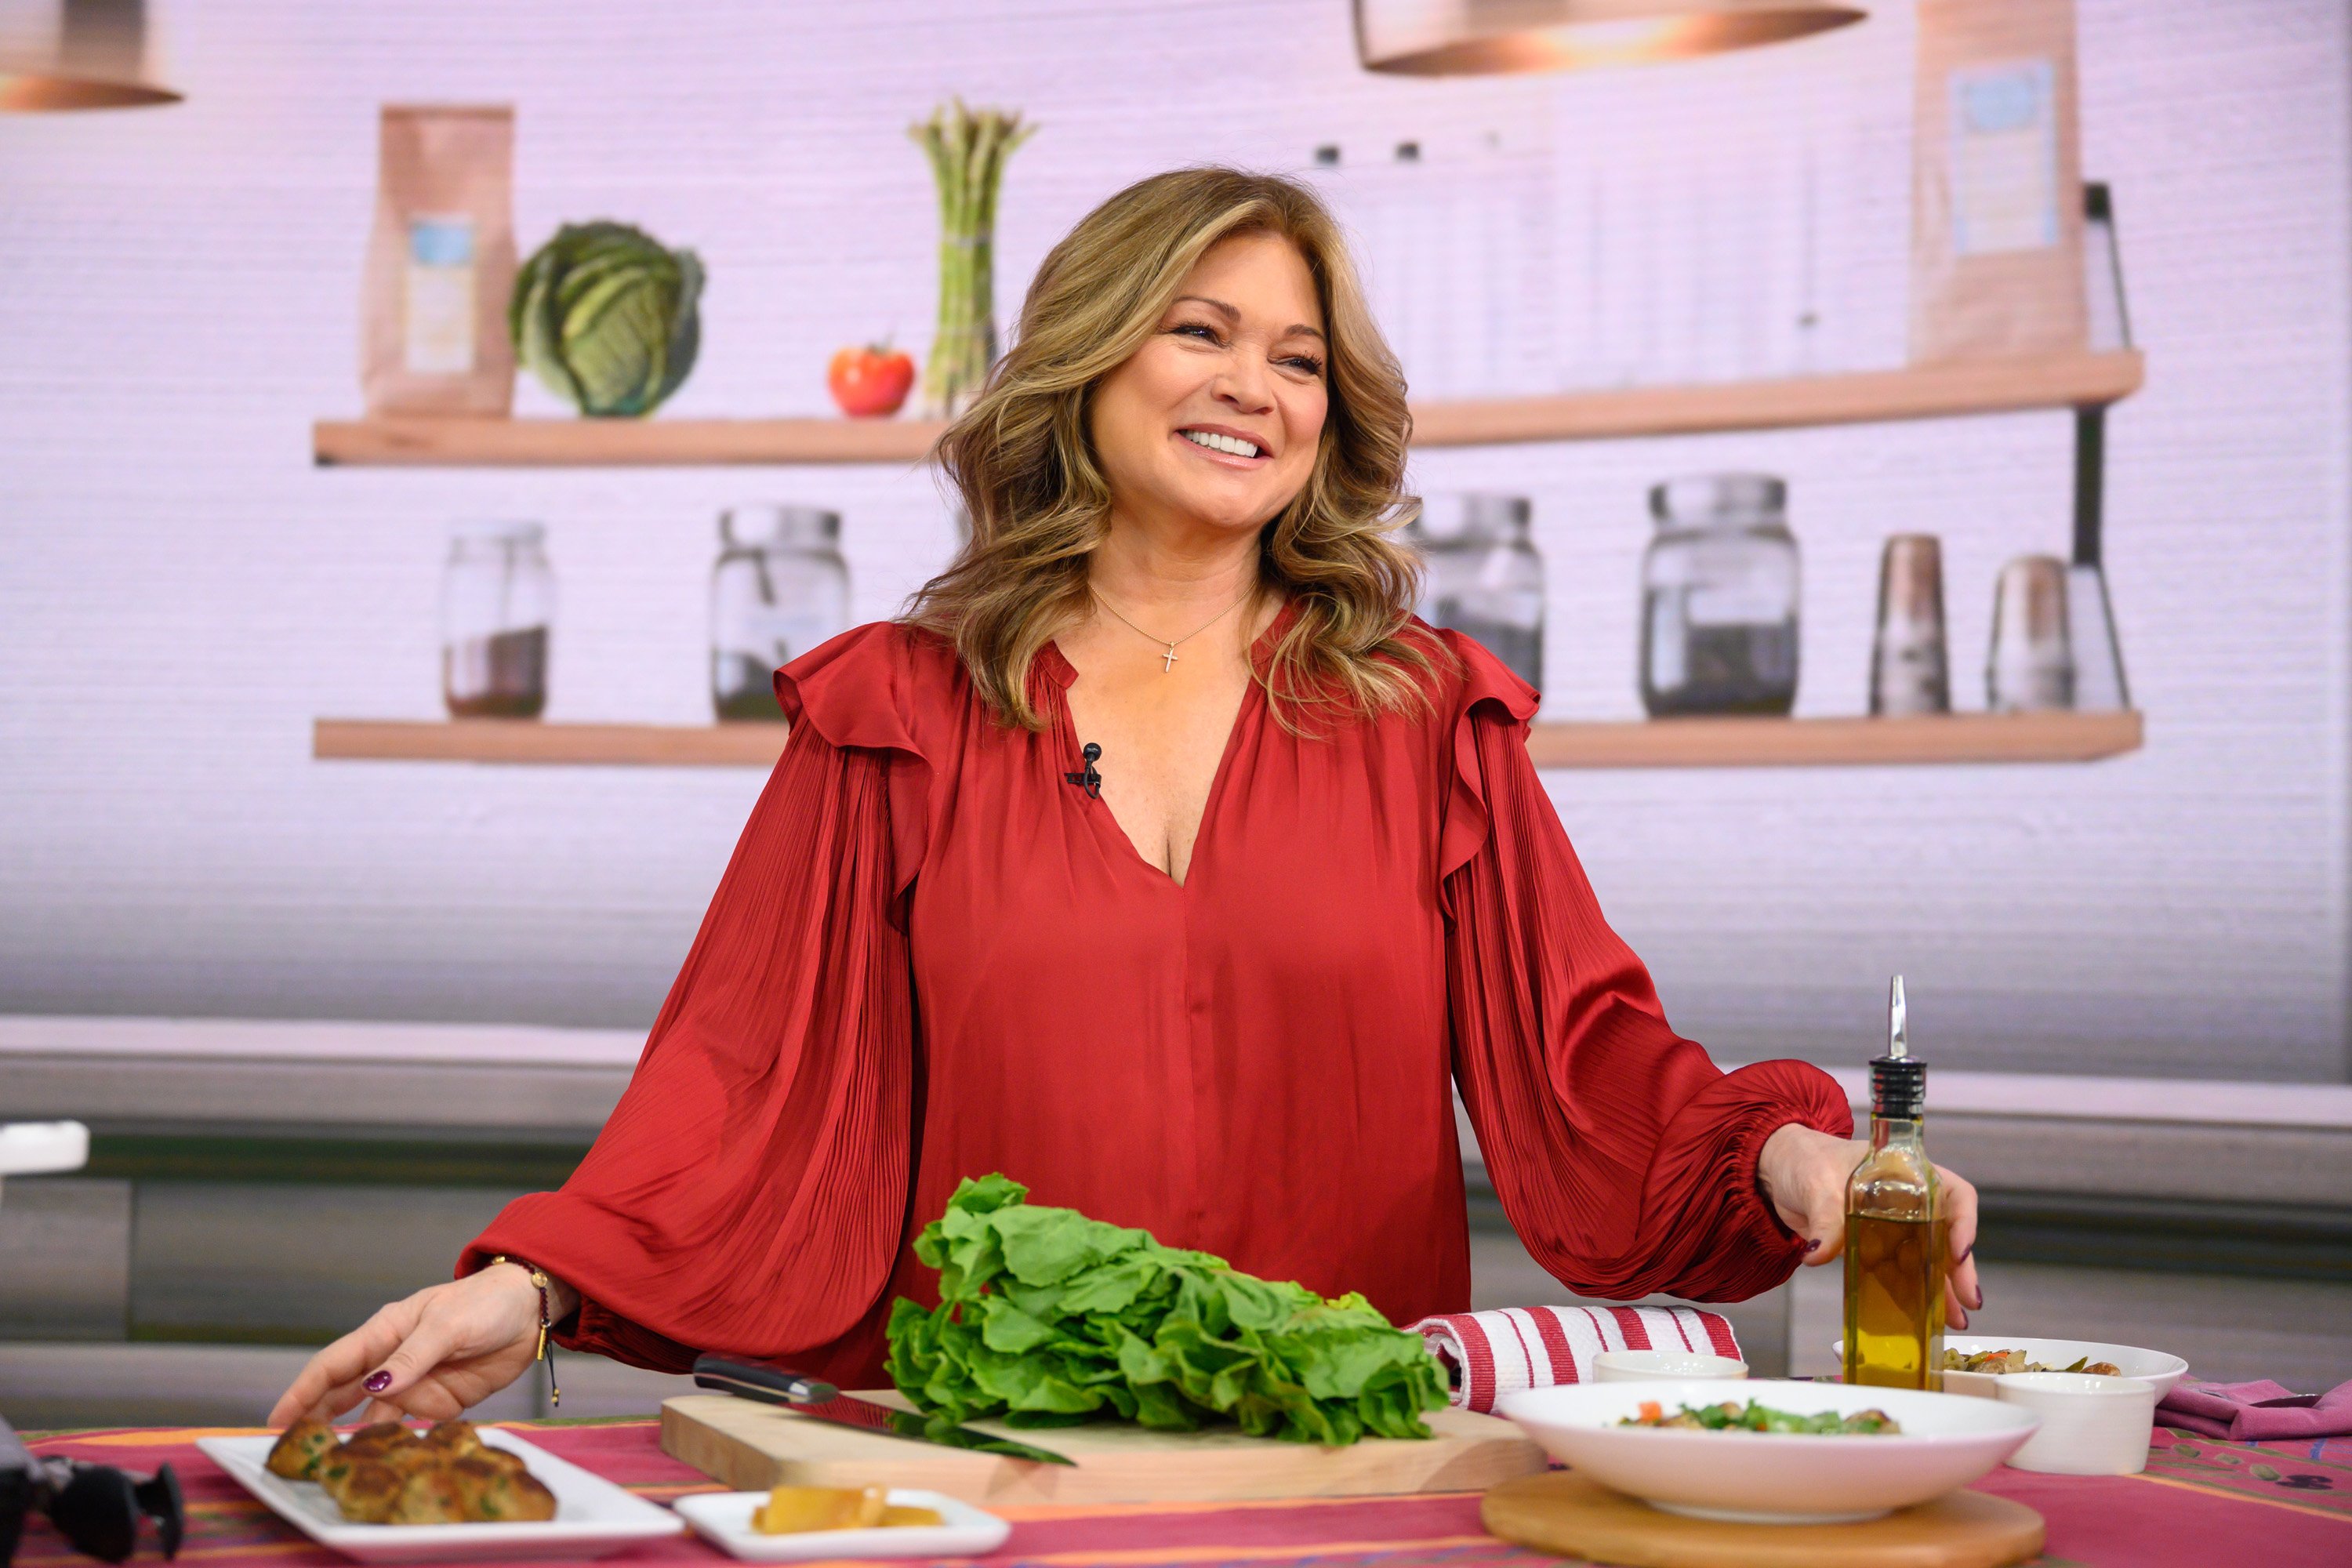 Actor and Food Network personality Valerie Bertinelli smiles for the camera